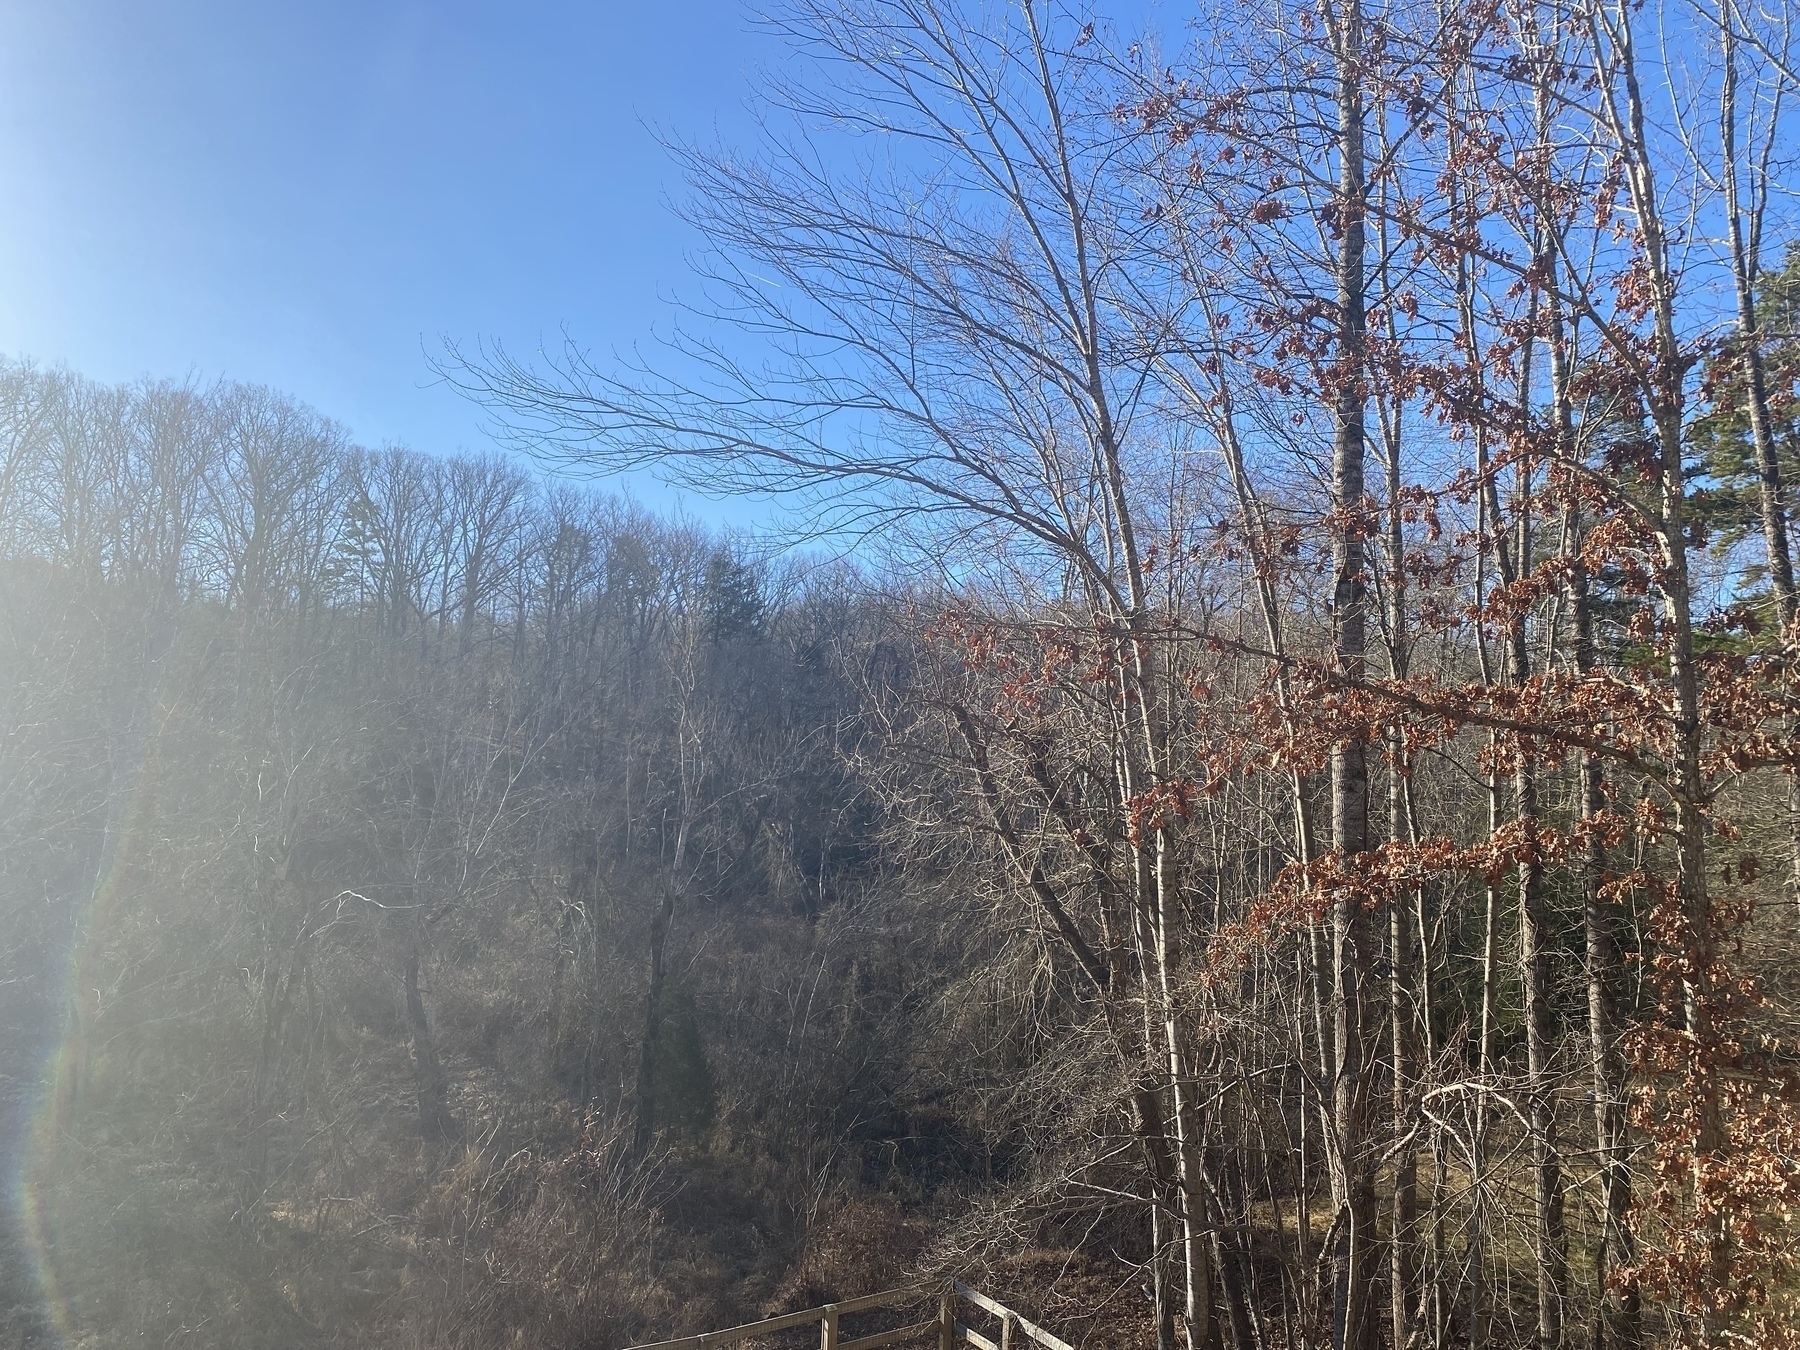 Picture from our deck of trees in our back yard. The sky is beautiful blue with a little sun glare on the left side of the picture. Unfortunately the picture doesn’t do it justice.